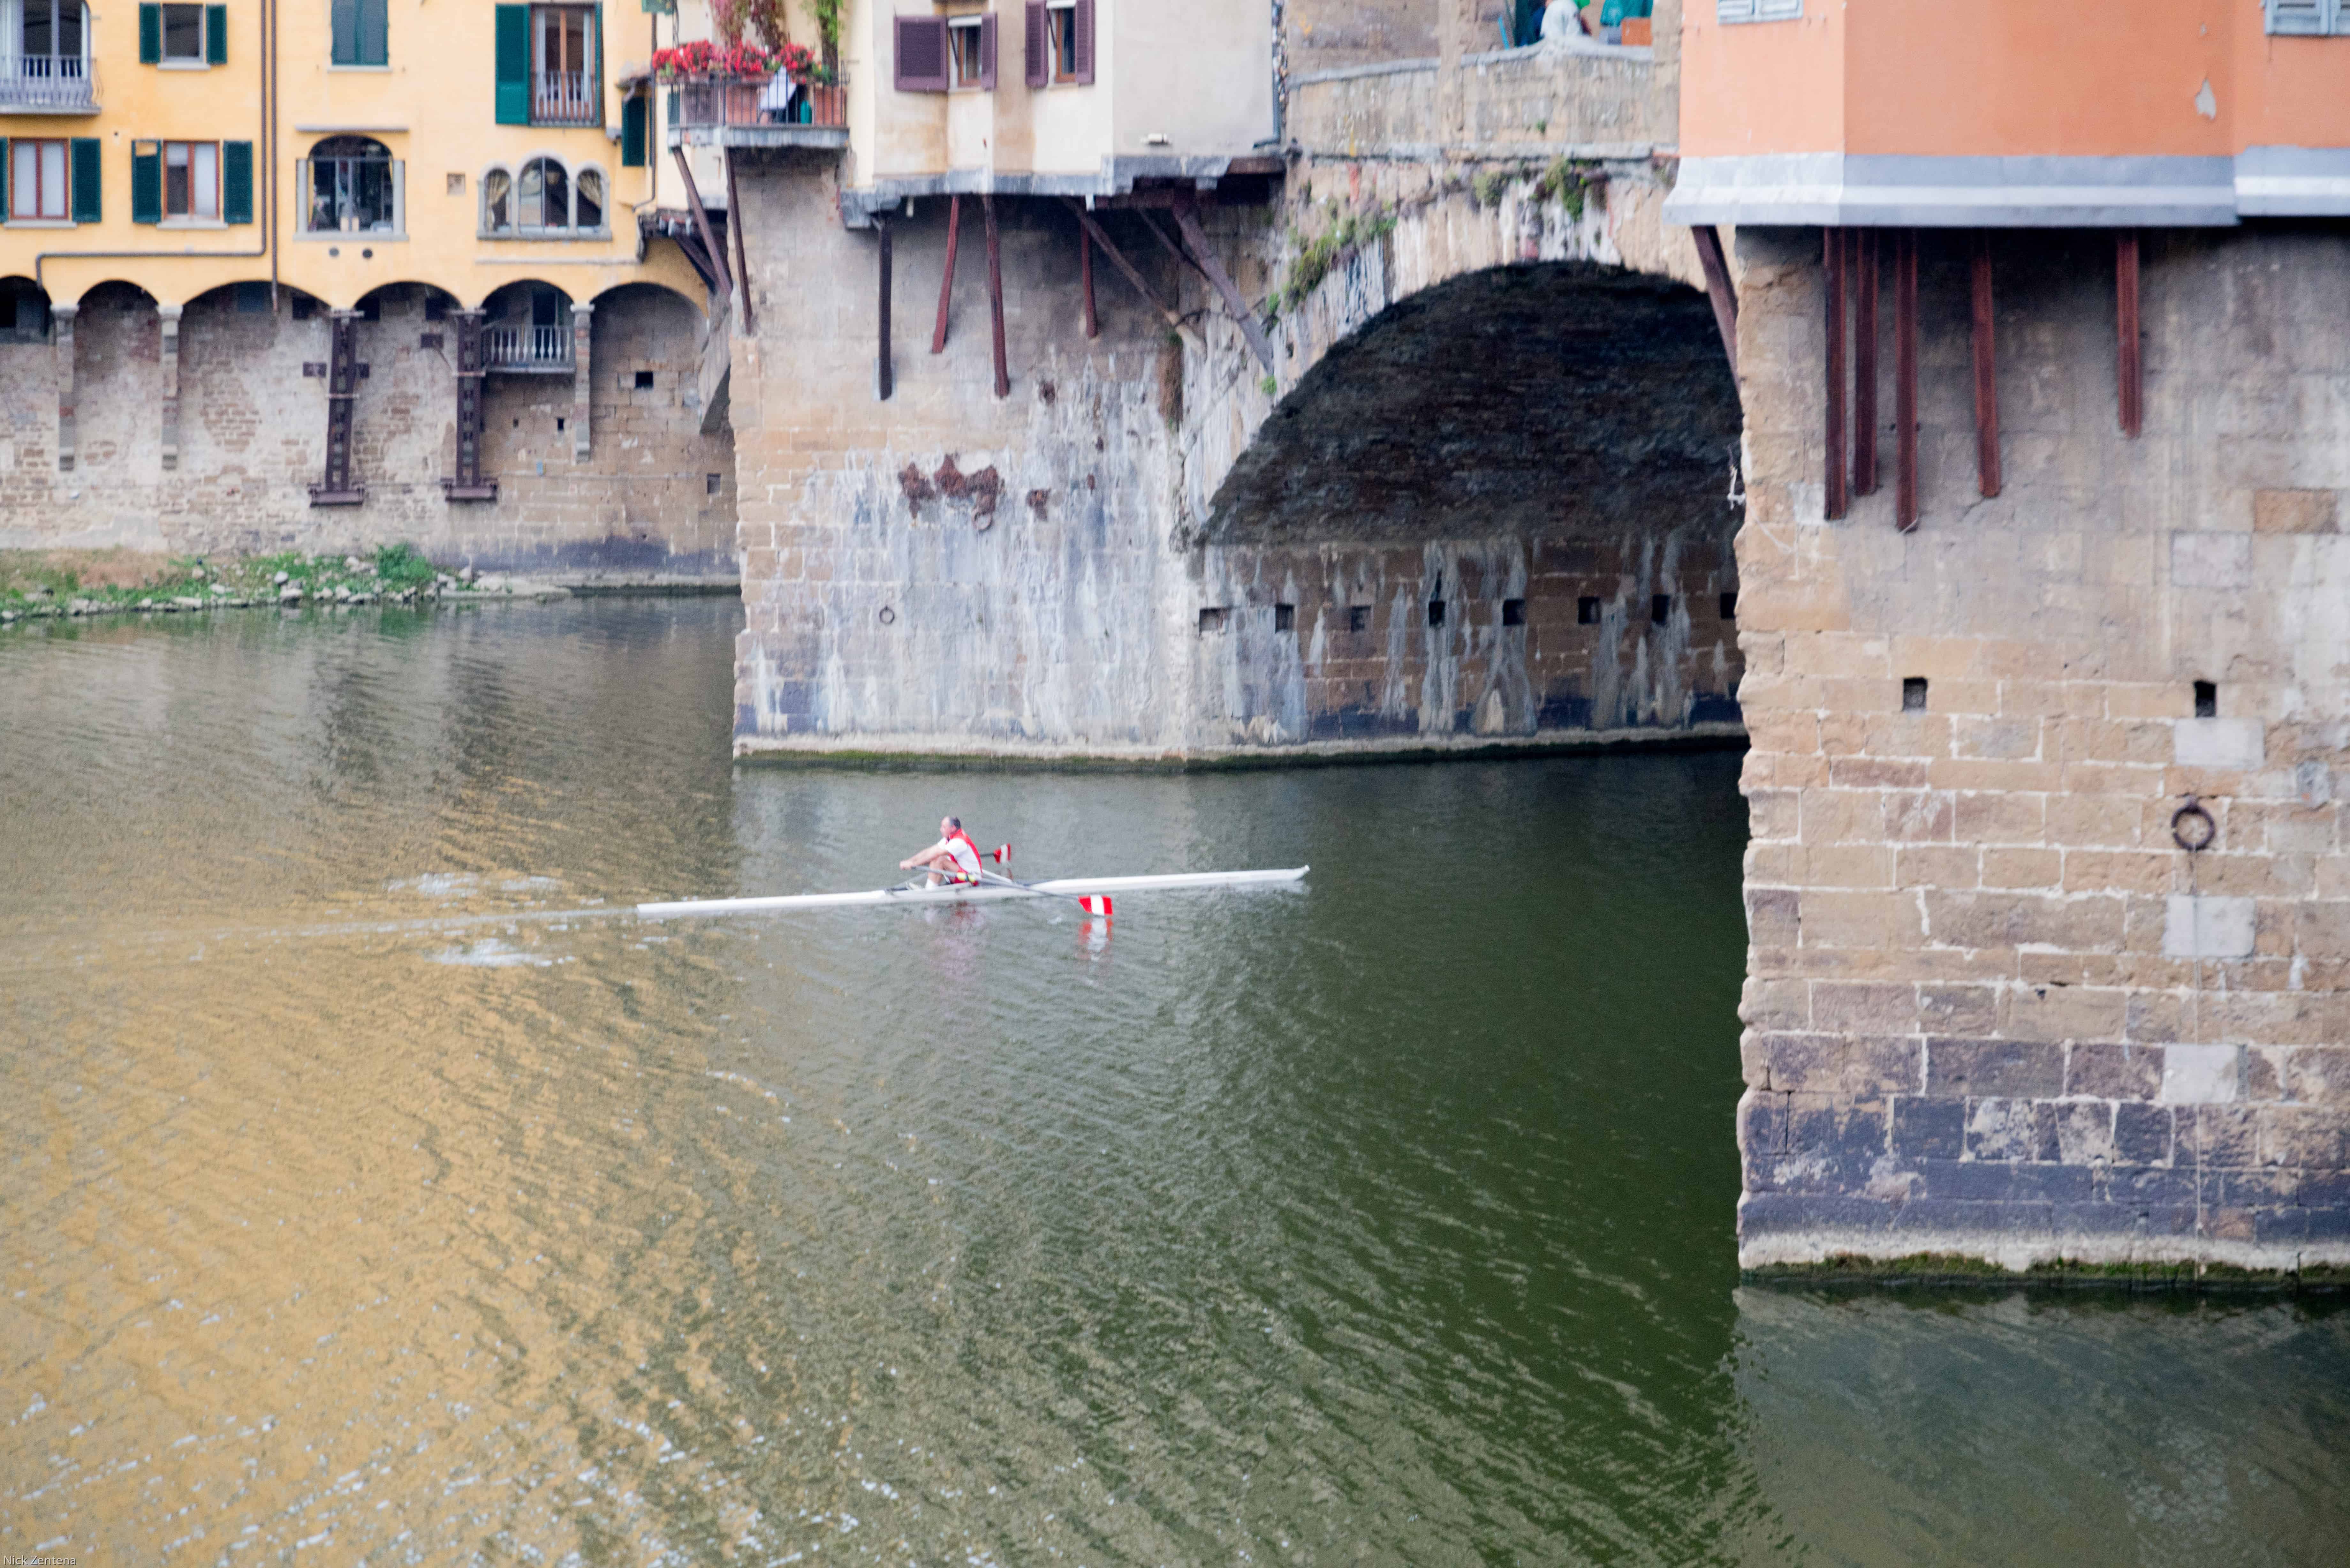 Rower on the Arno River Florence Italy